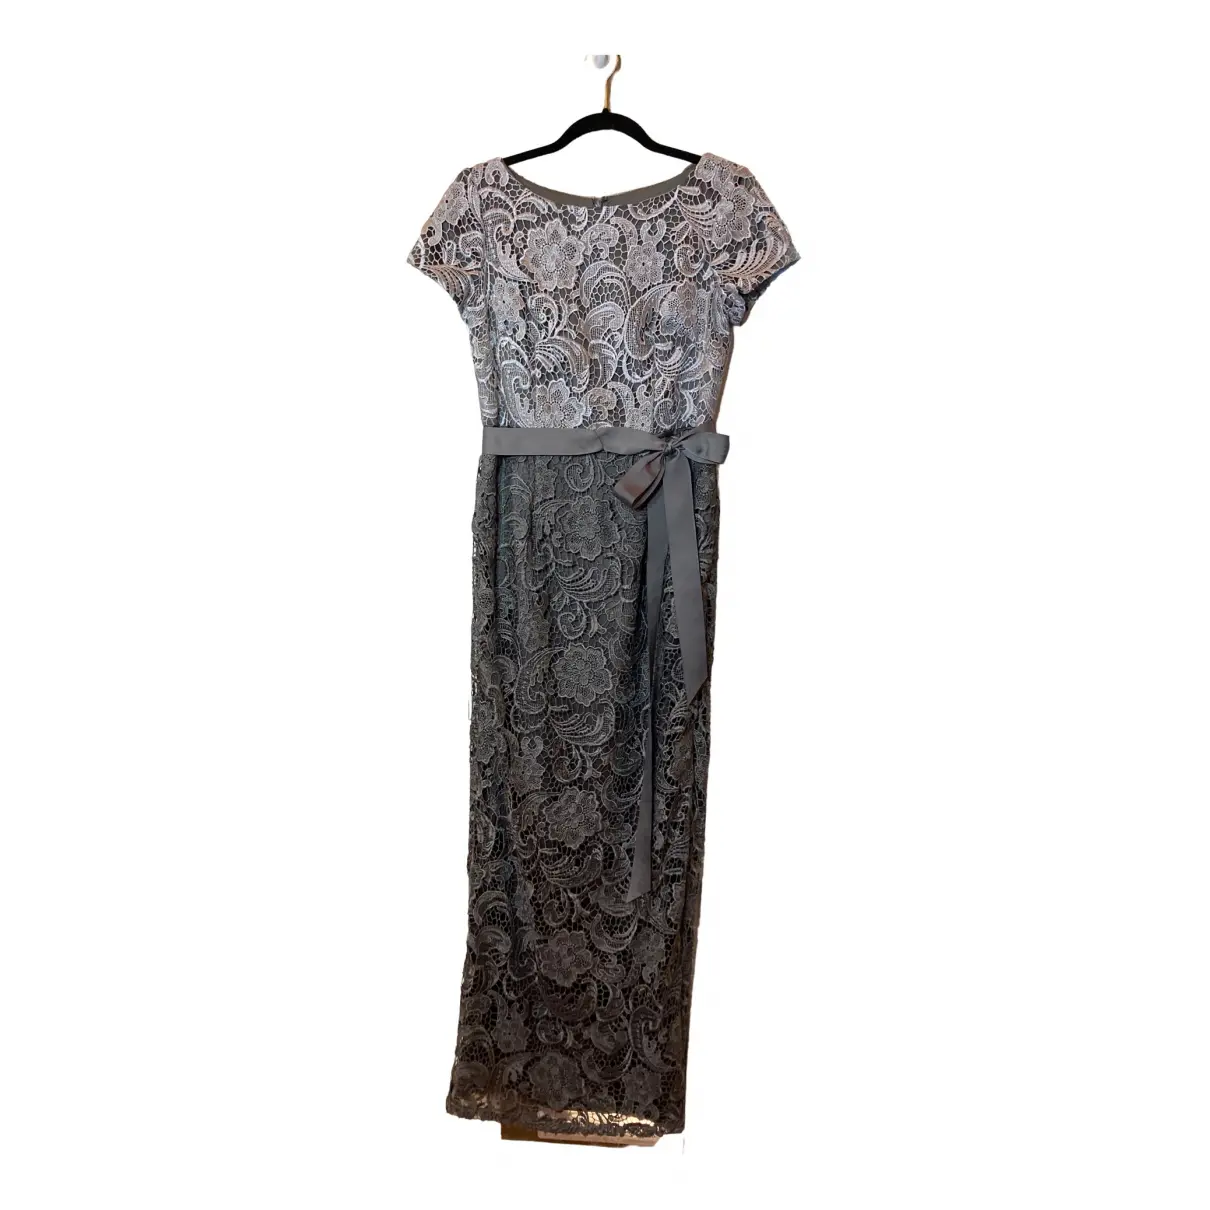 Lace dress Adrianna Papell